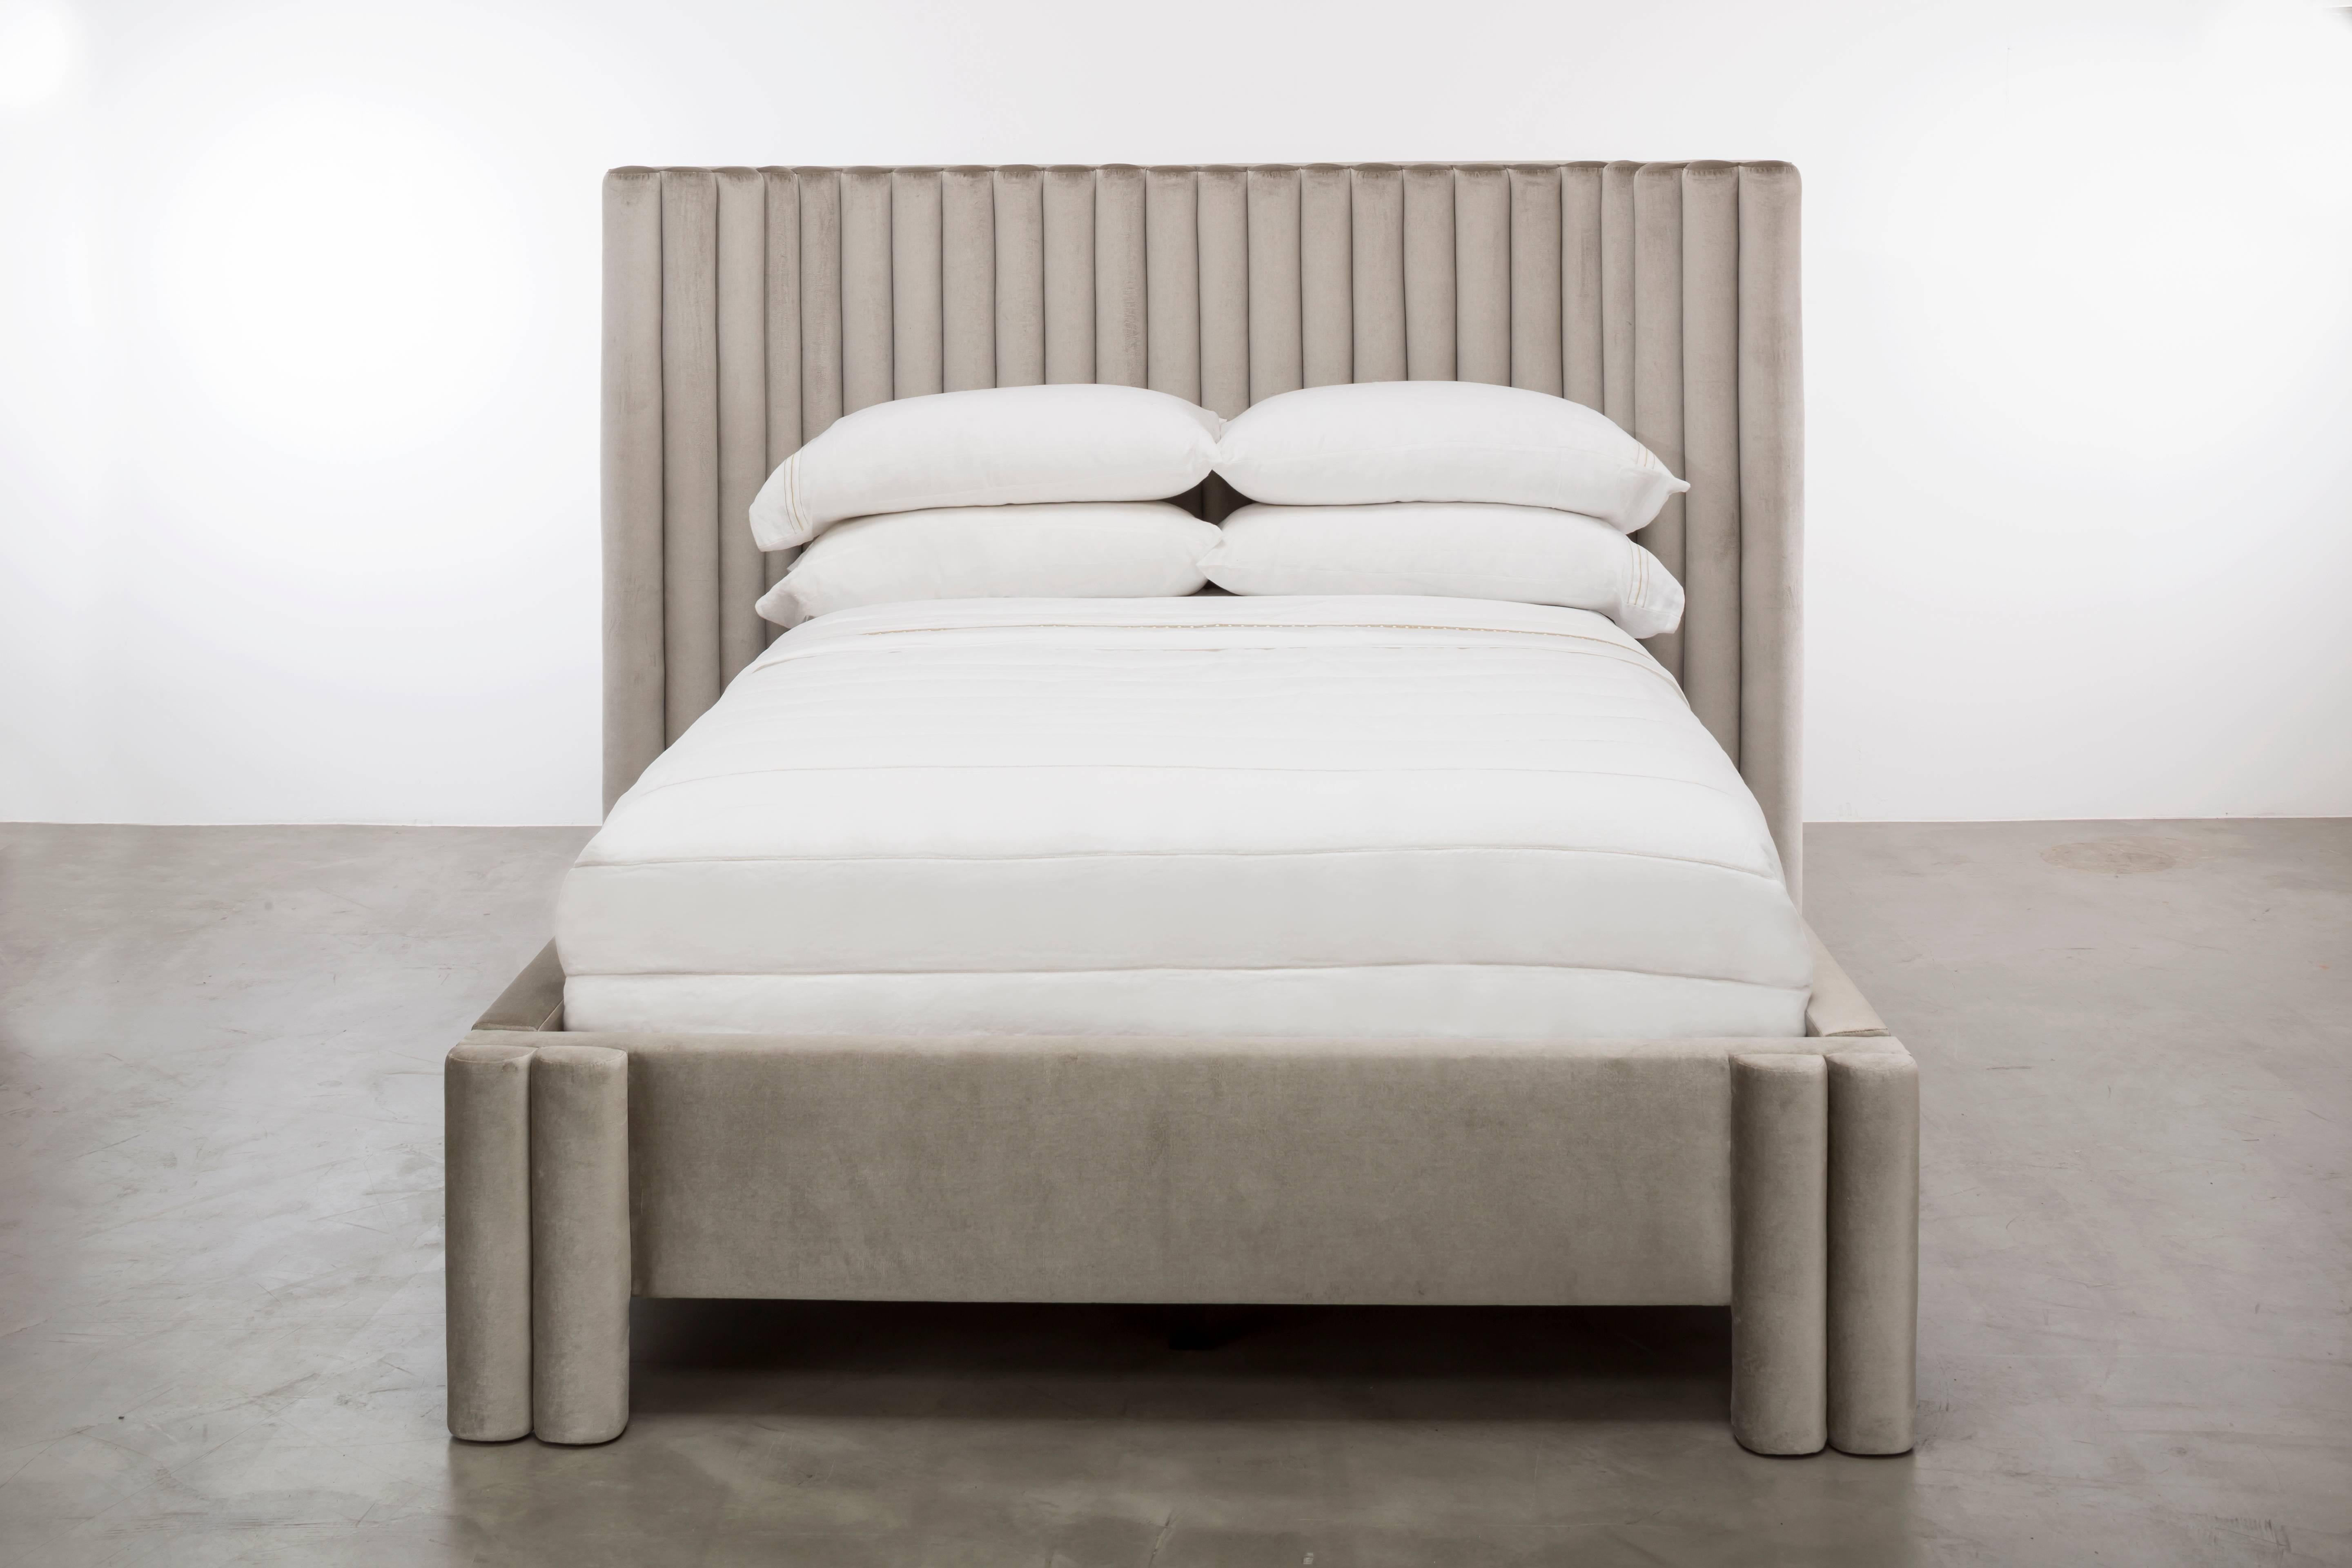 The Sacha Bed features a sexy, modern and vertically channeled headboard and upholstered frame with a fully upholstered platform system.  Available in King, Cali King, Queen or Twin sizes.  Headboard height can also be customized.  As shown in Queen